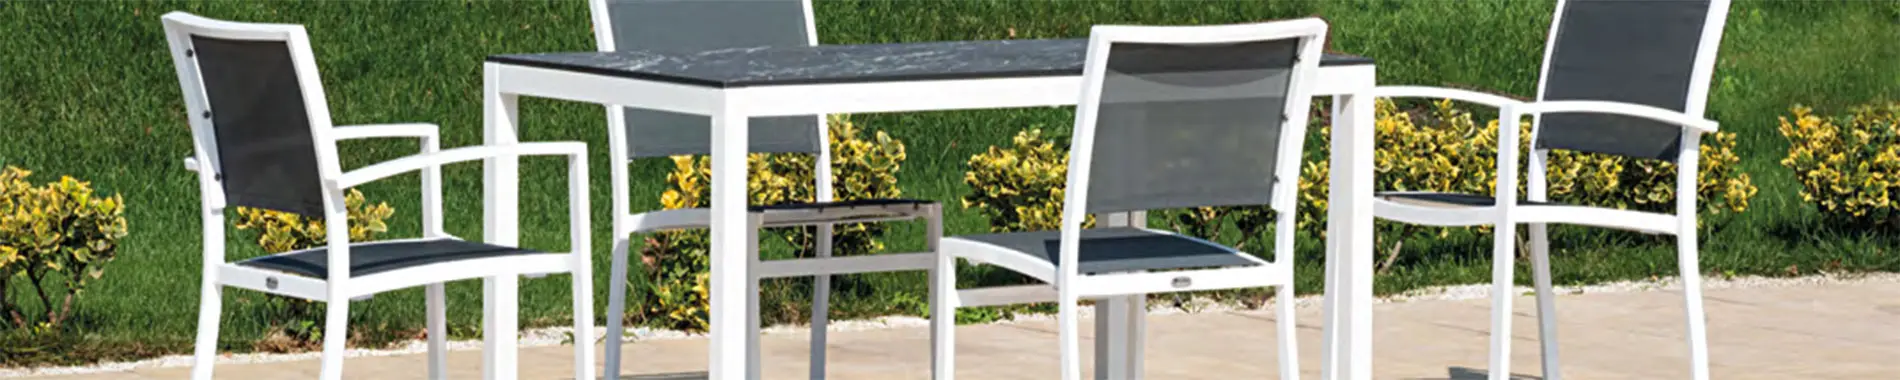 Outdoor furniture from the collection: Meditex